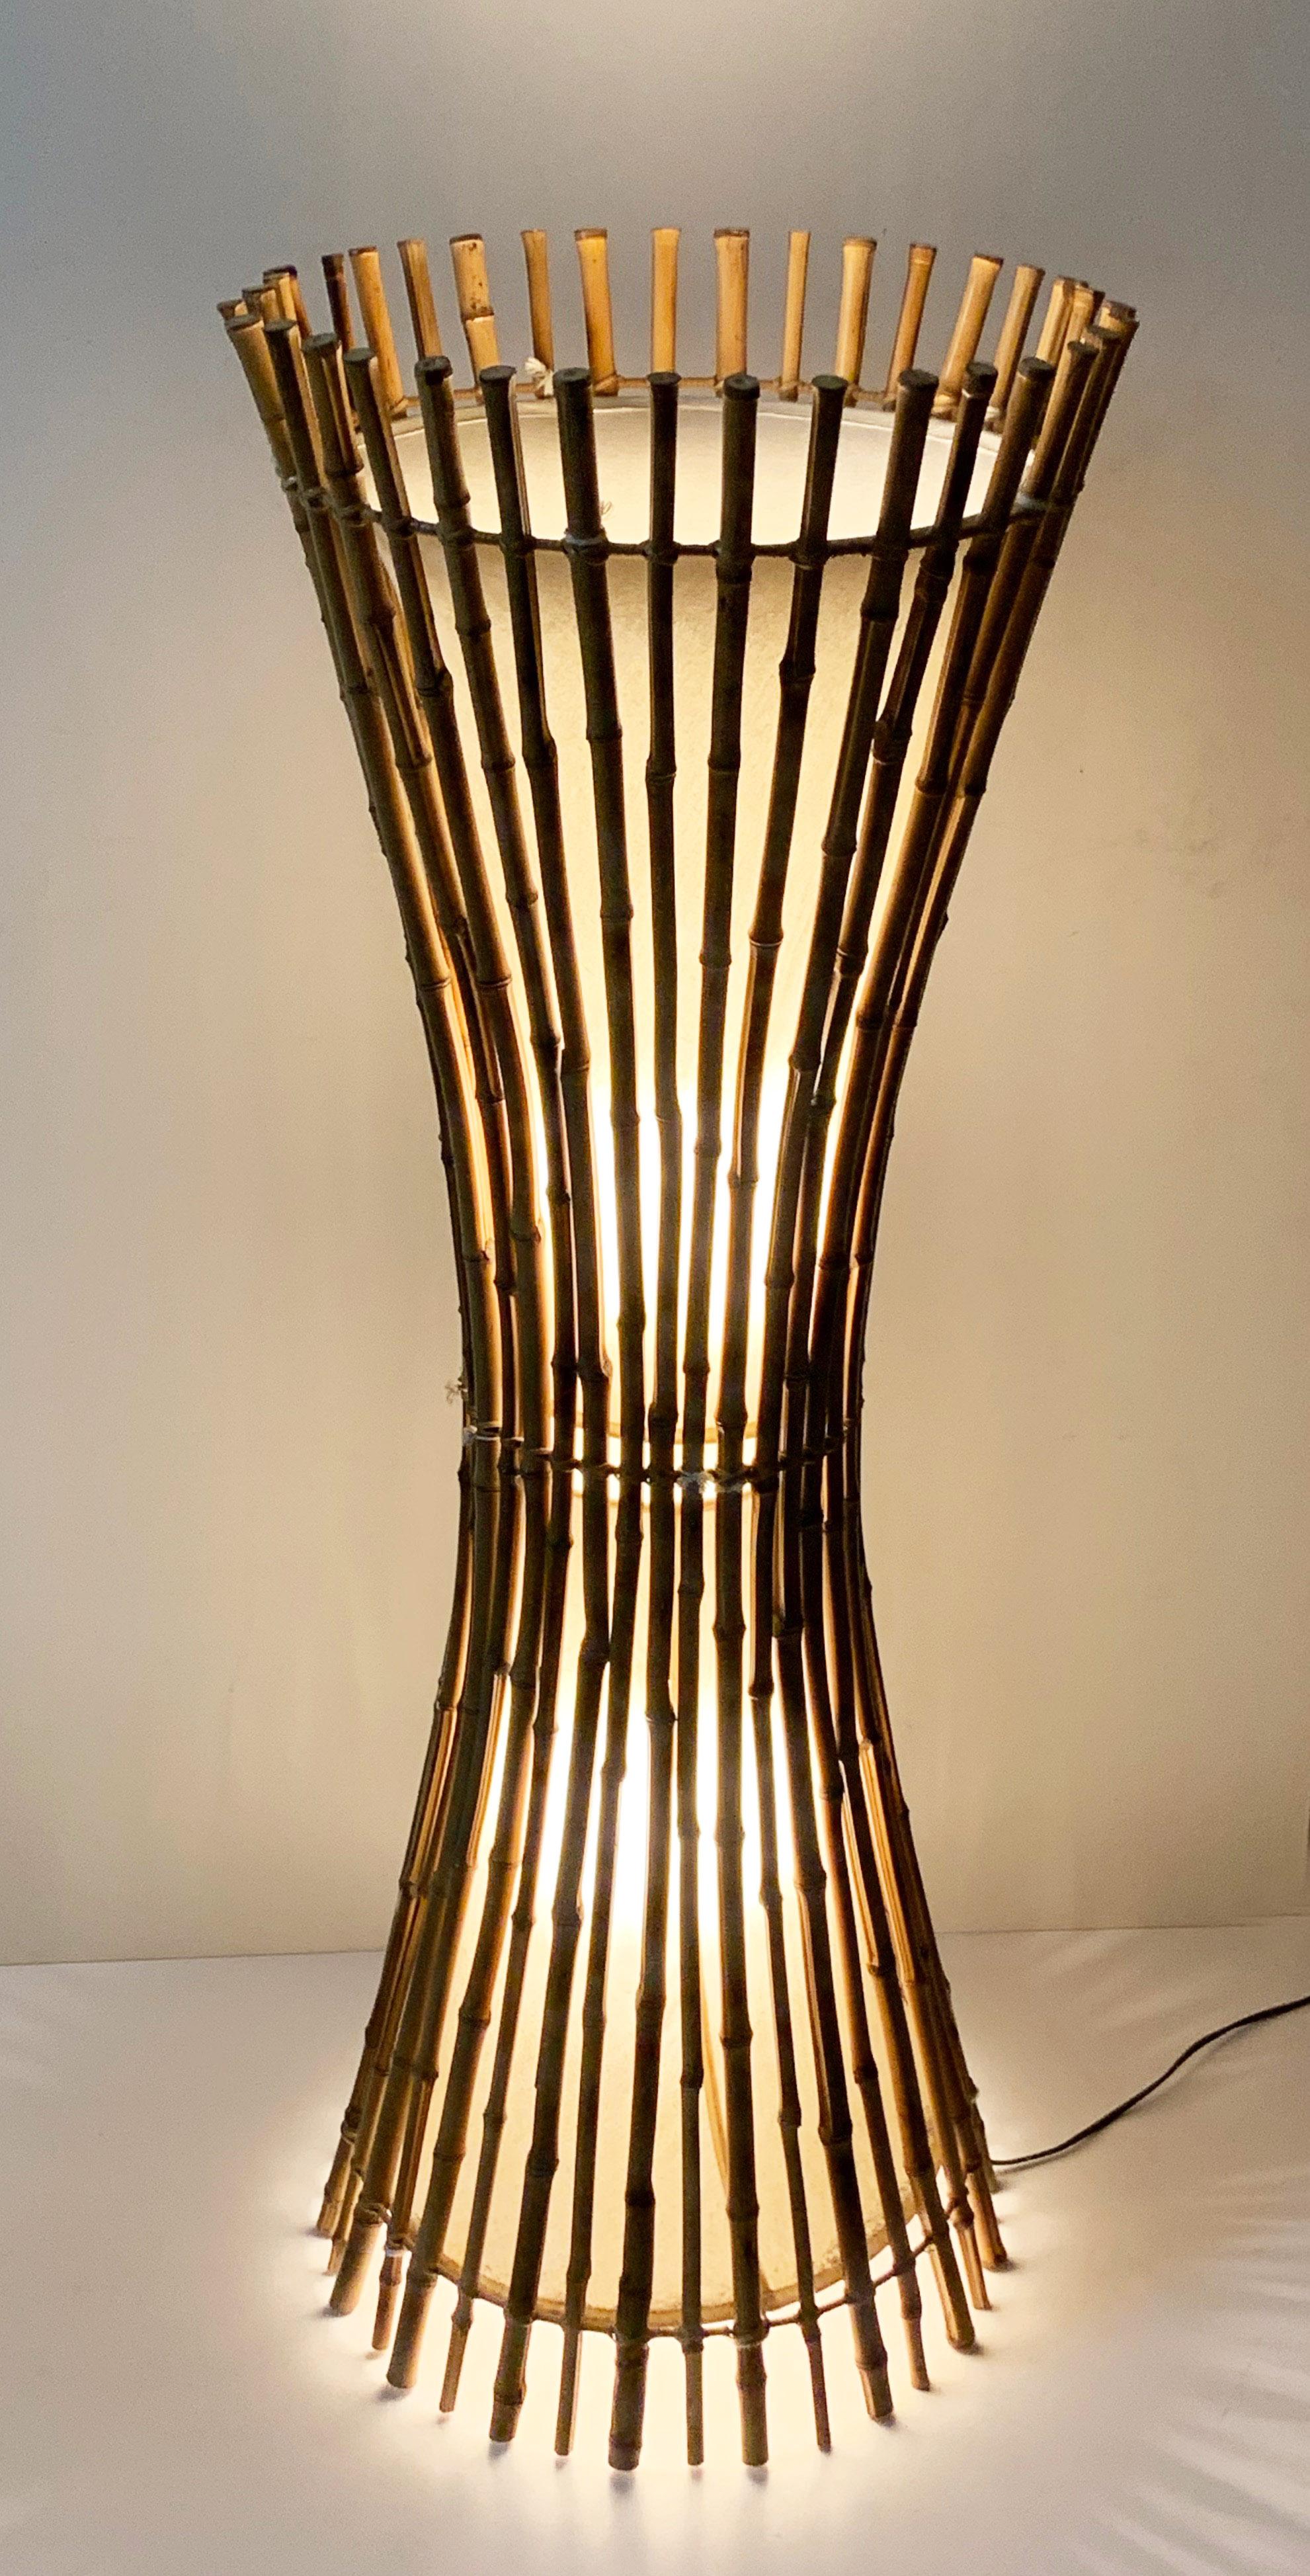 Midcentury Bamboo and Rattan Italian Floor Lamp after Franco Albini, 1960s For Sale 6